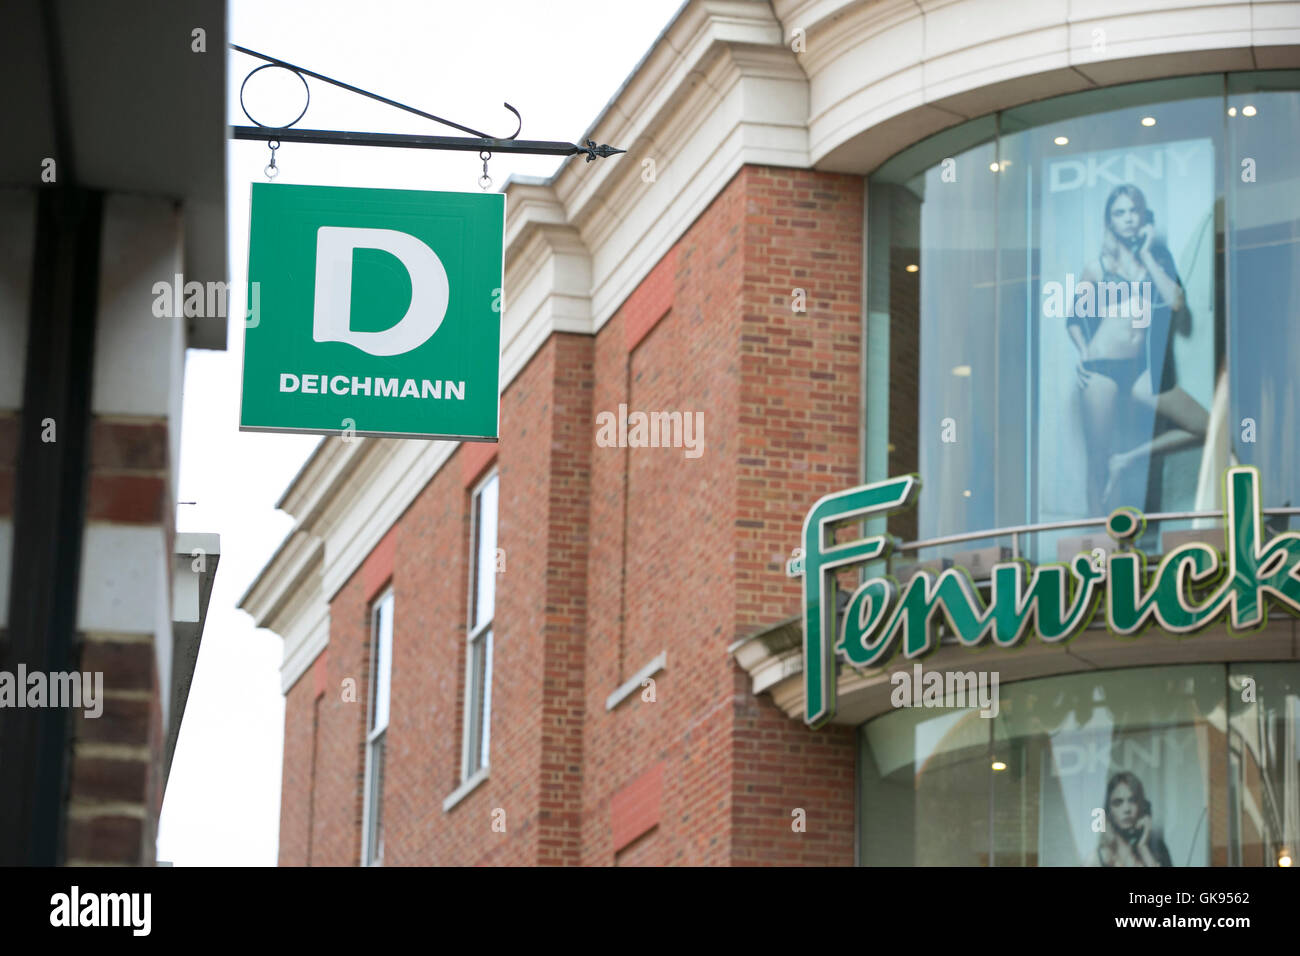 Picture of the Deichmann sign with Fenwick in the background in Whitefriars Canterbury Stock Photo